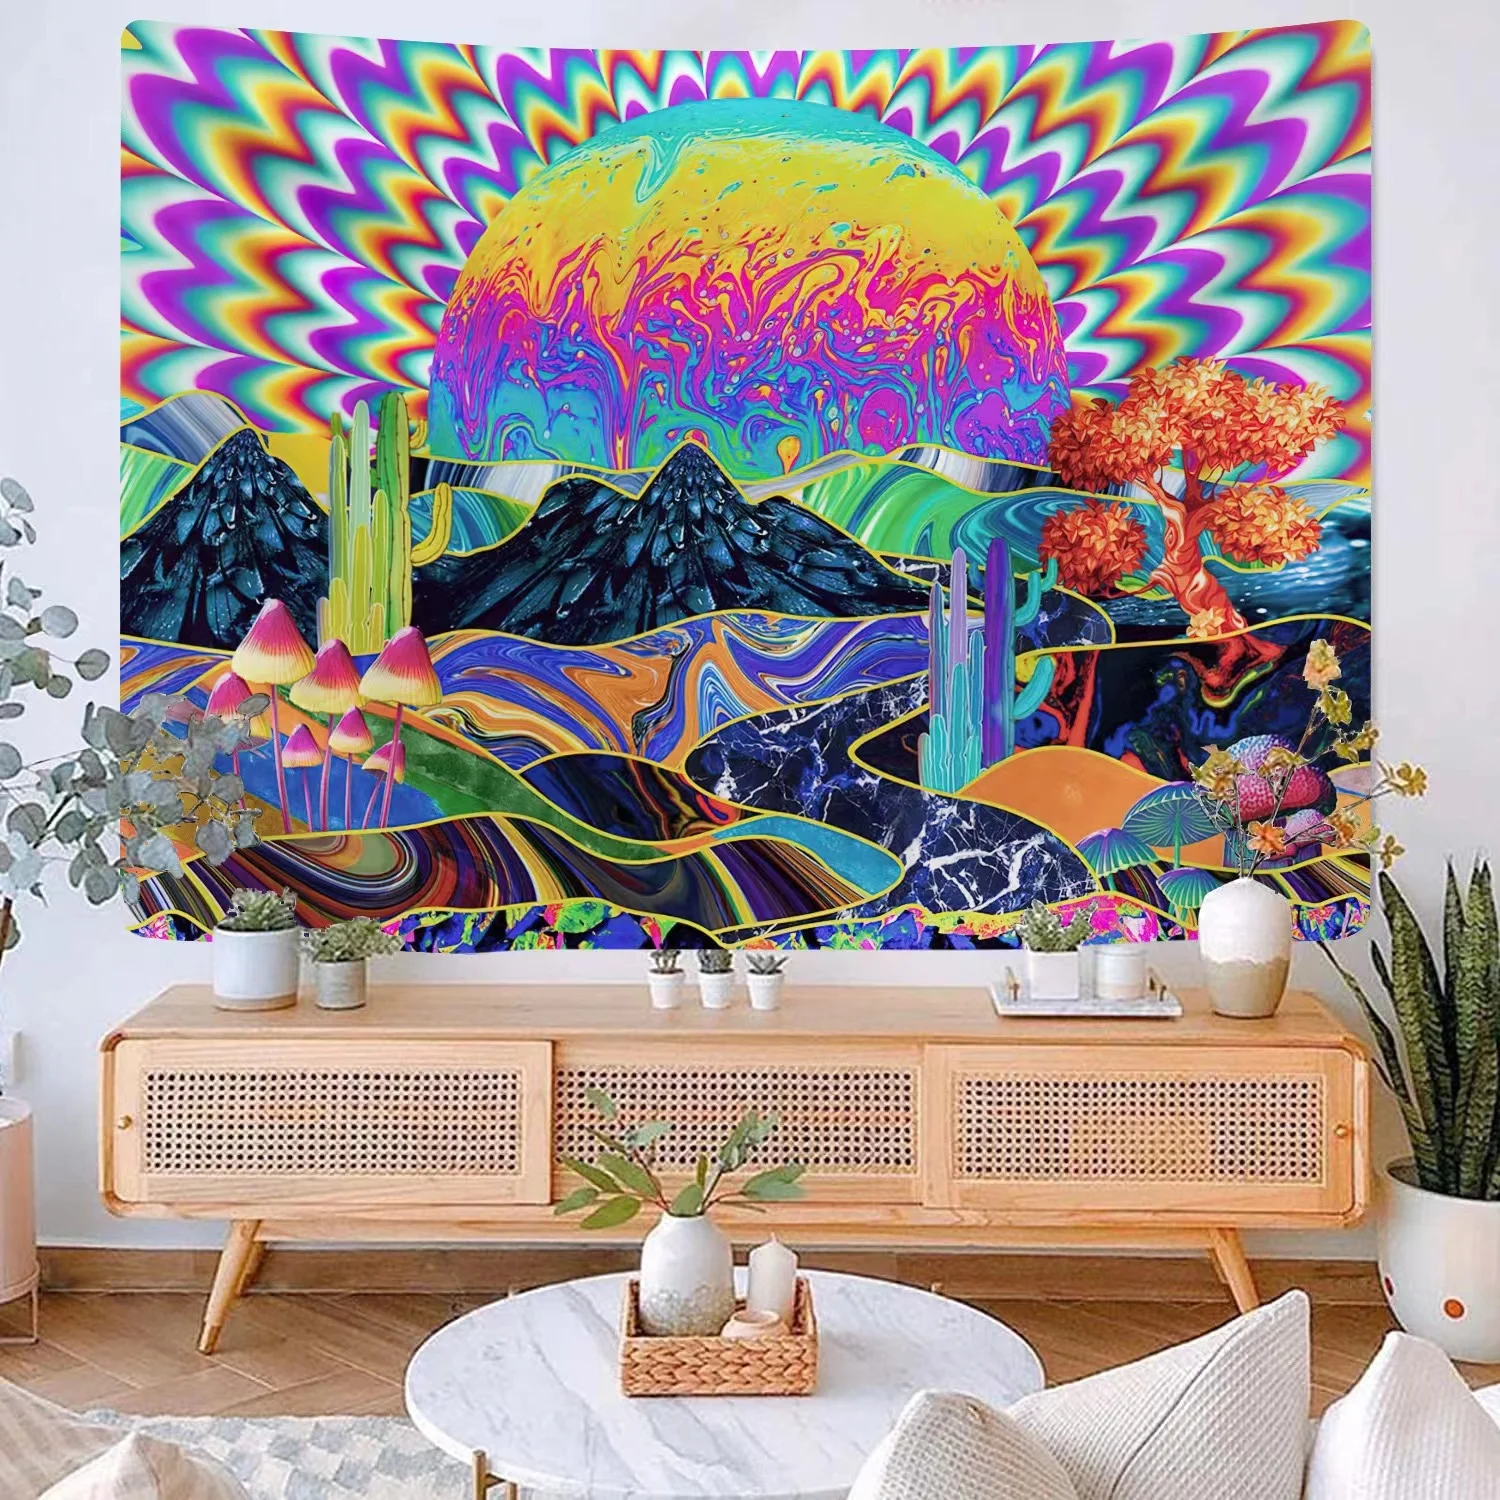 

Wall Decor Tapestry Room Home Aesthetic Hippie Tapisserie Psychedelic Sun Mushroom Tapiz Pared Tela Grande Decoration Chambre